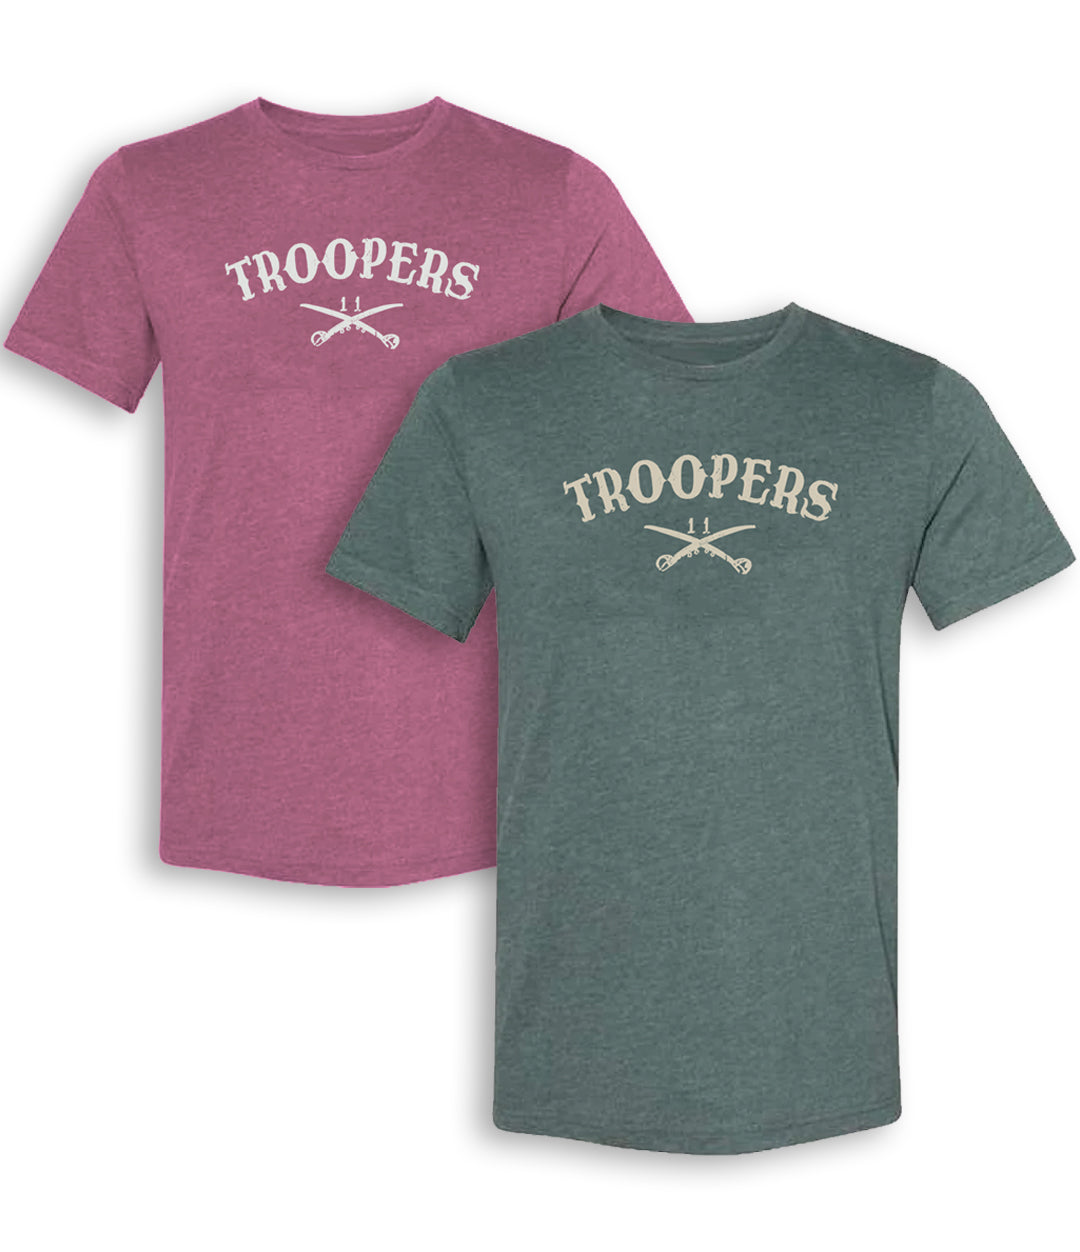 The Basic Troopers Tee